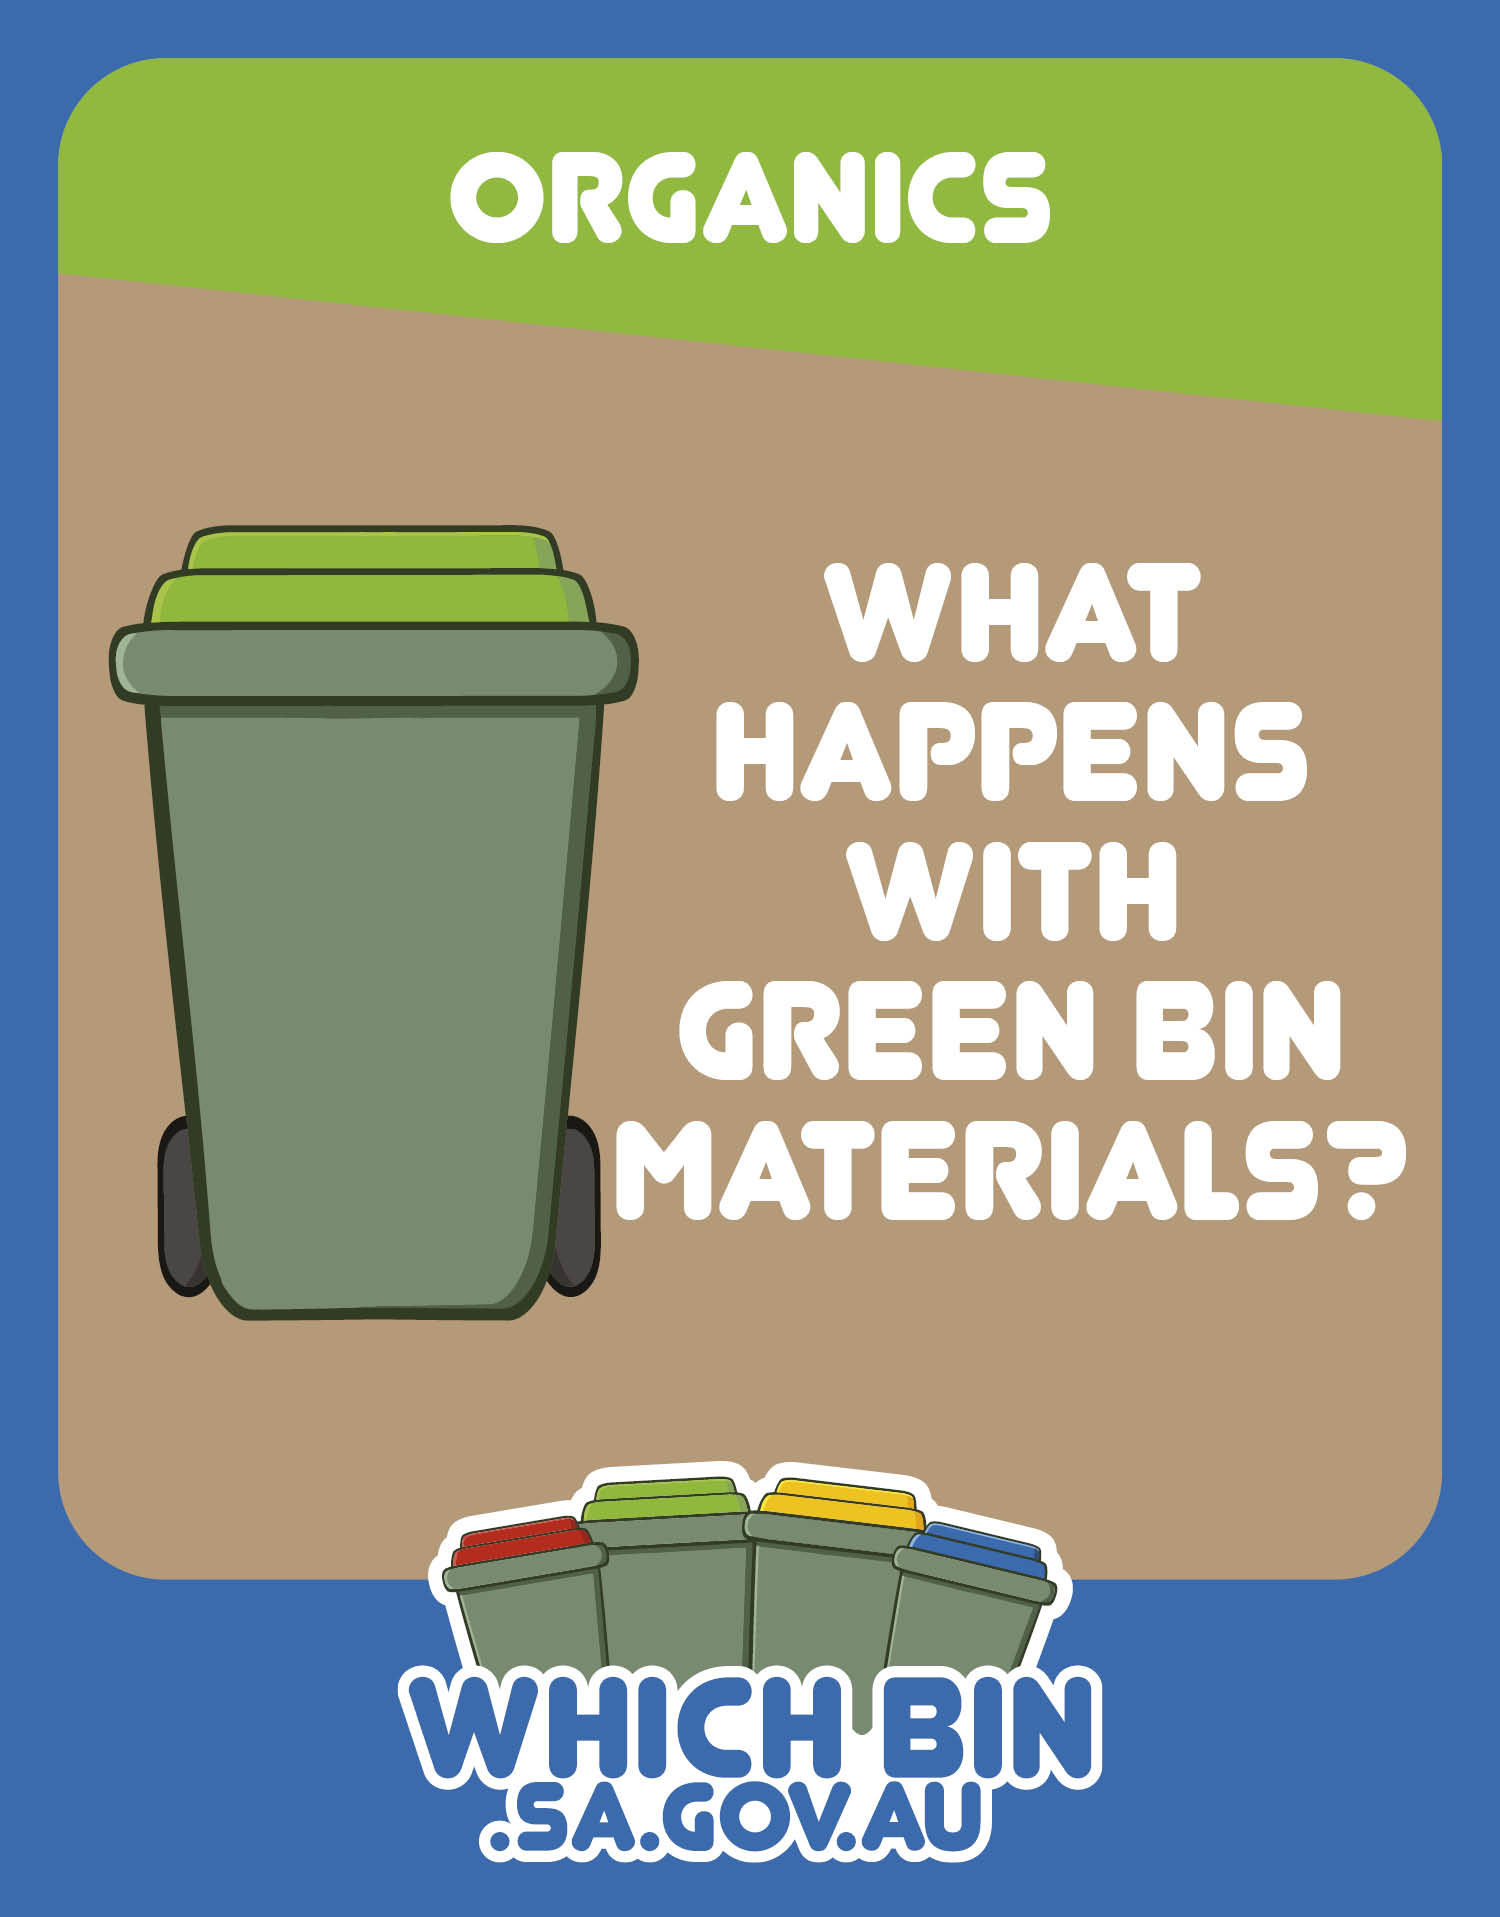 What happens with green bin materials?